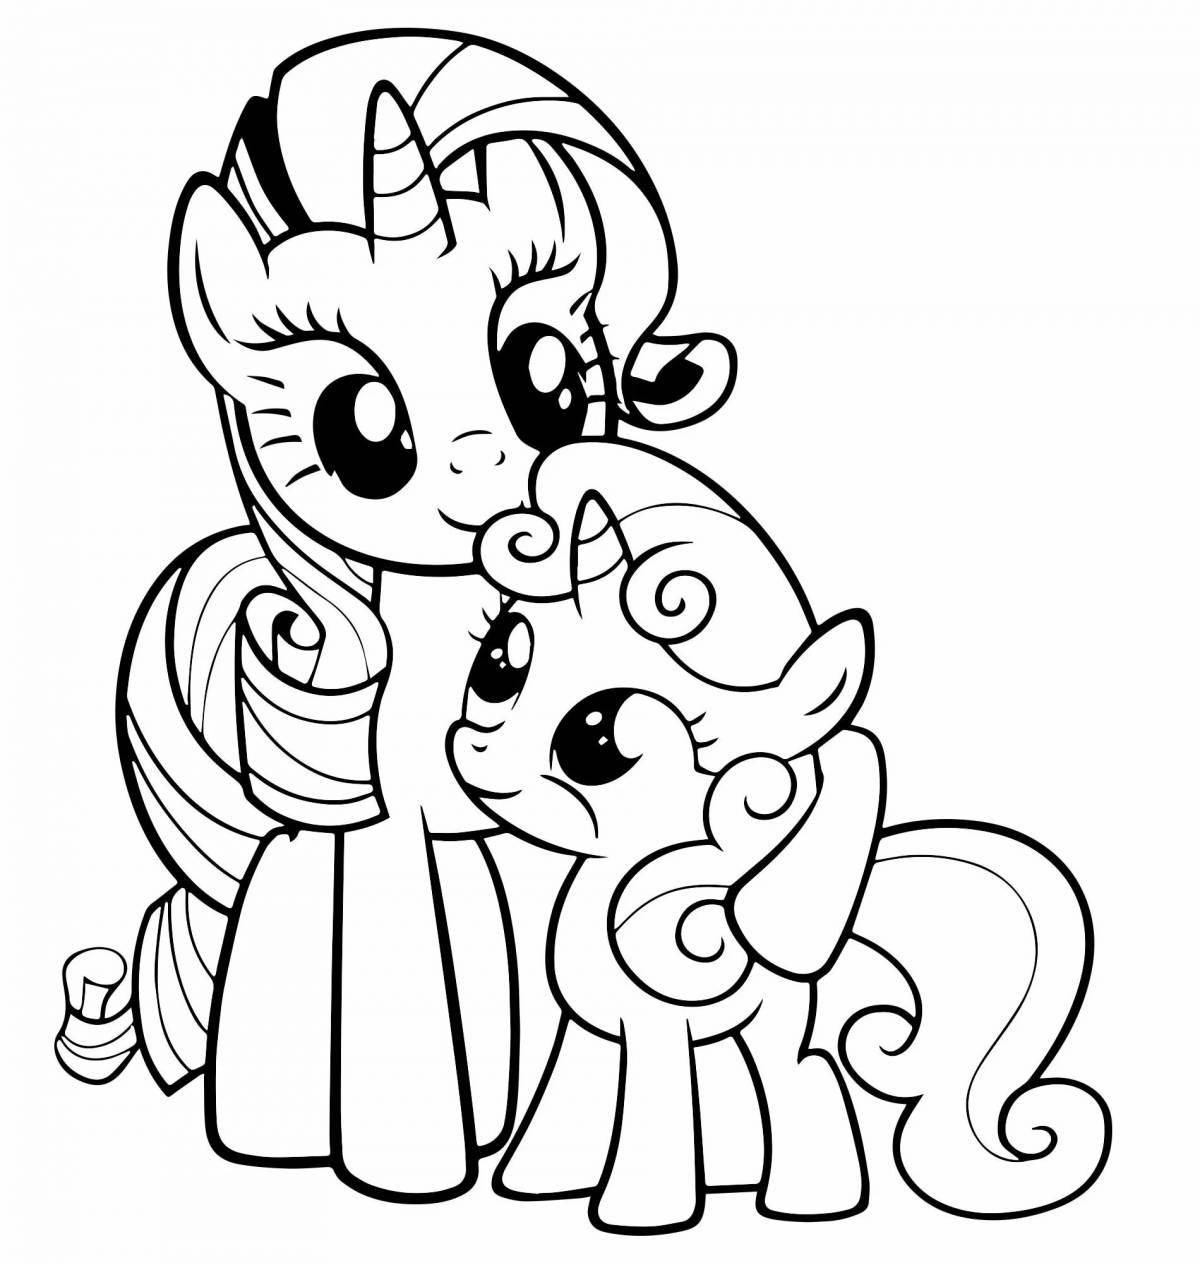 Bright pony friendship coloring page